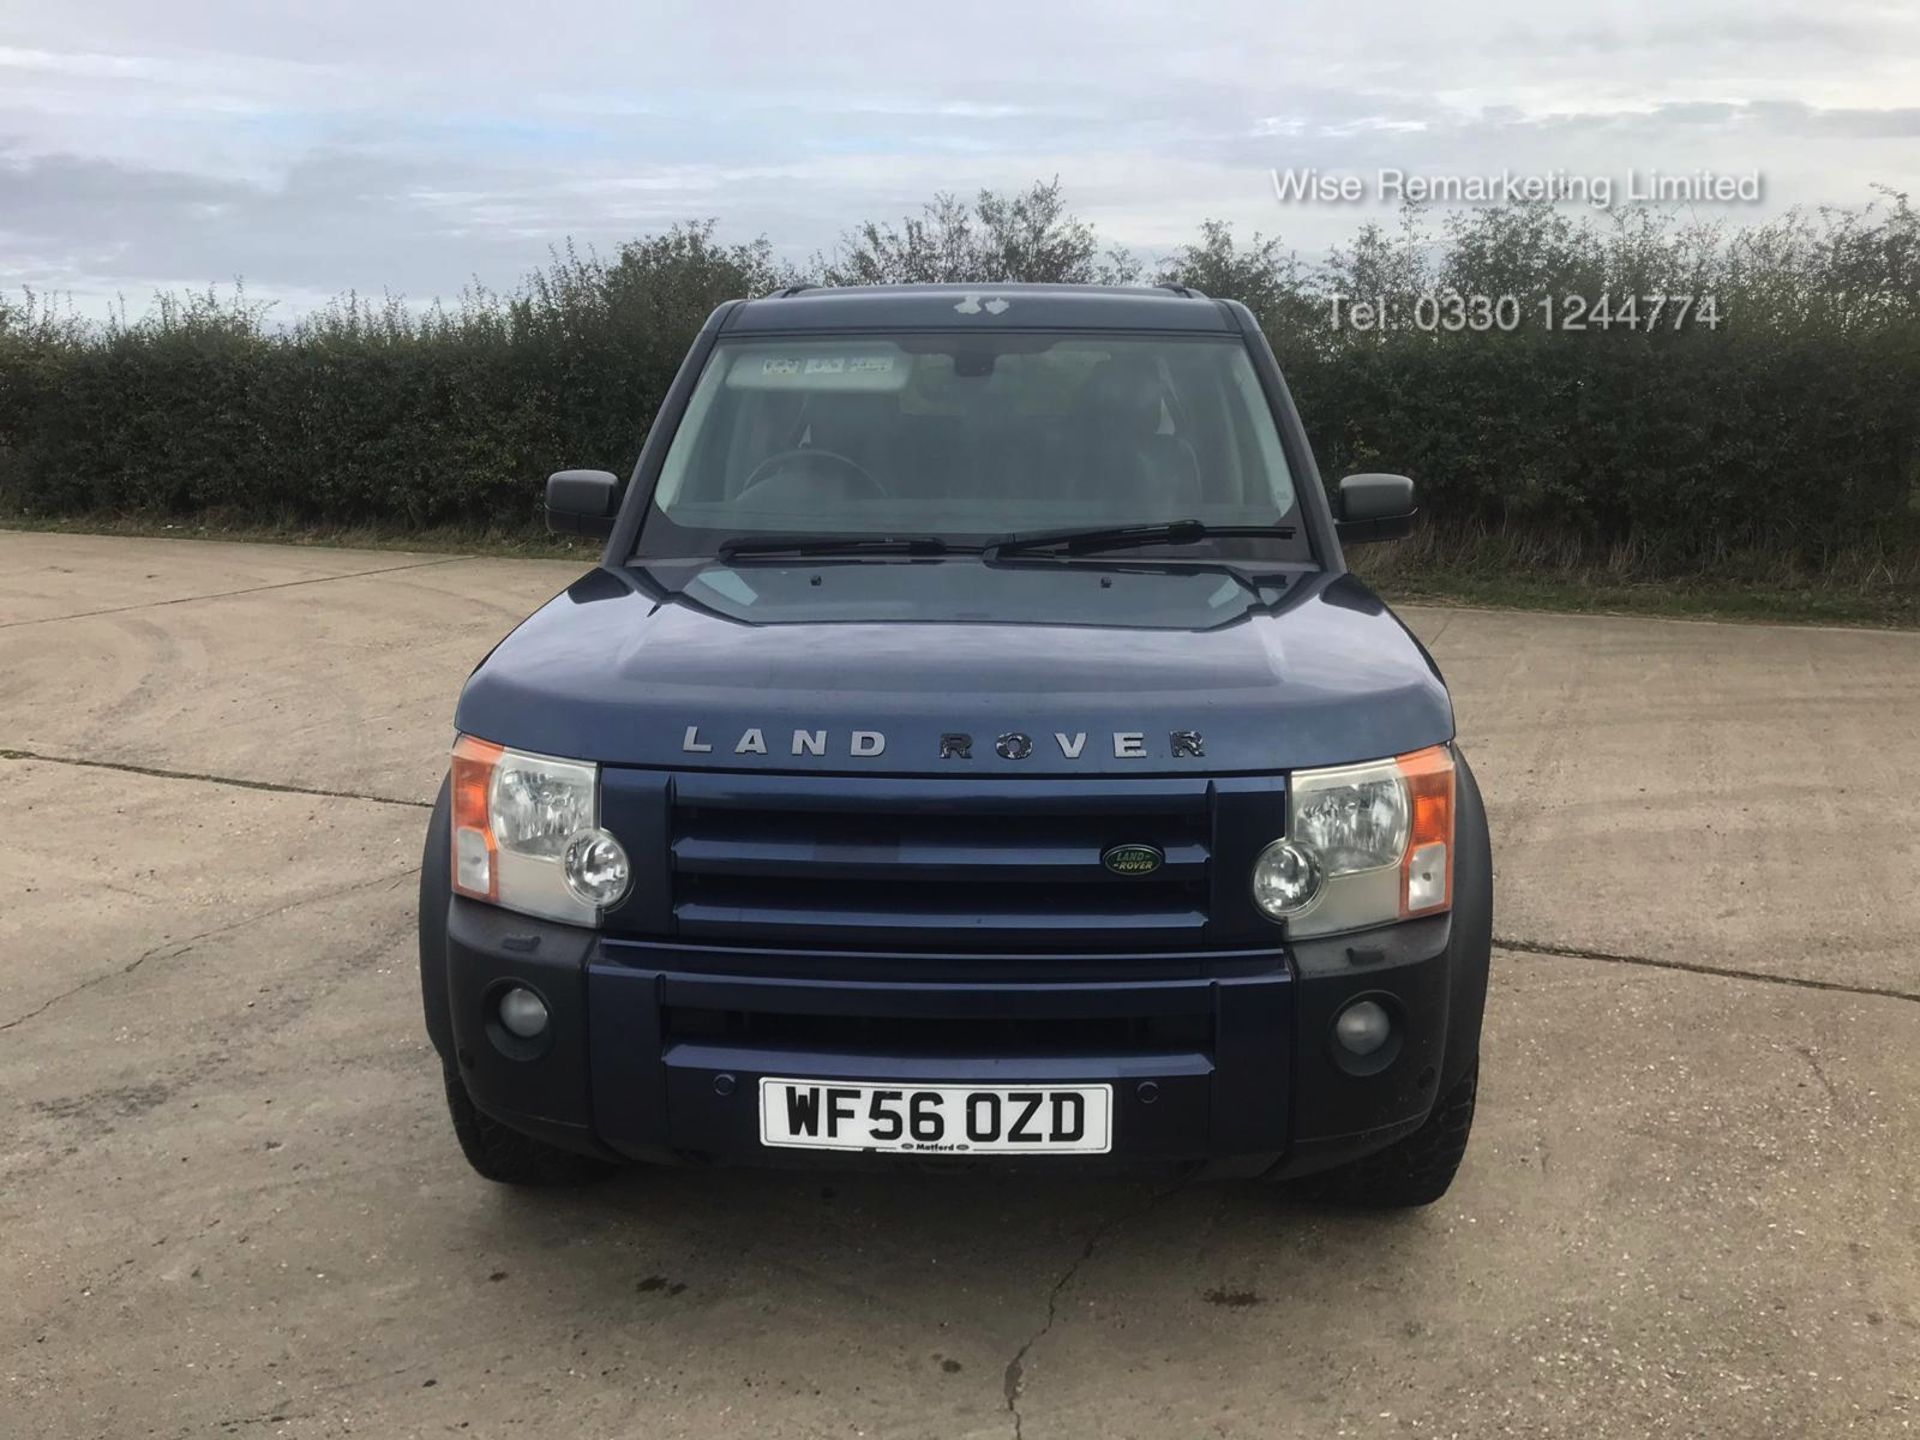 Land Rover Discovery 2.7 TdV6 Special Equipment - Automatic (2007 Model) Full Leather - Elec Sunroof - Image 2 of 20